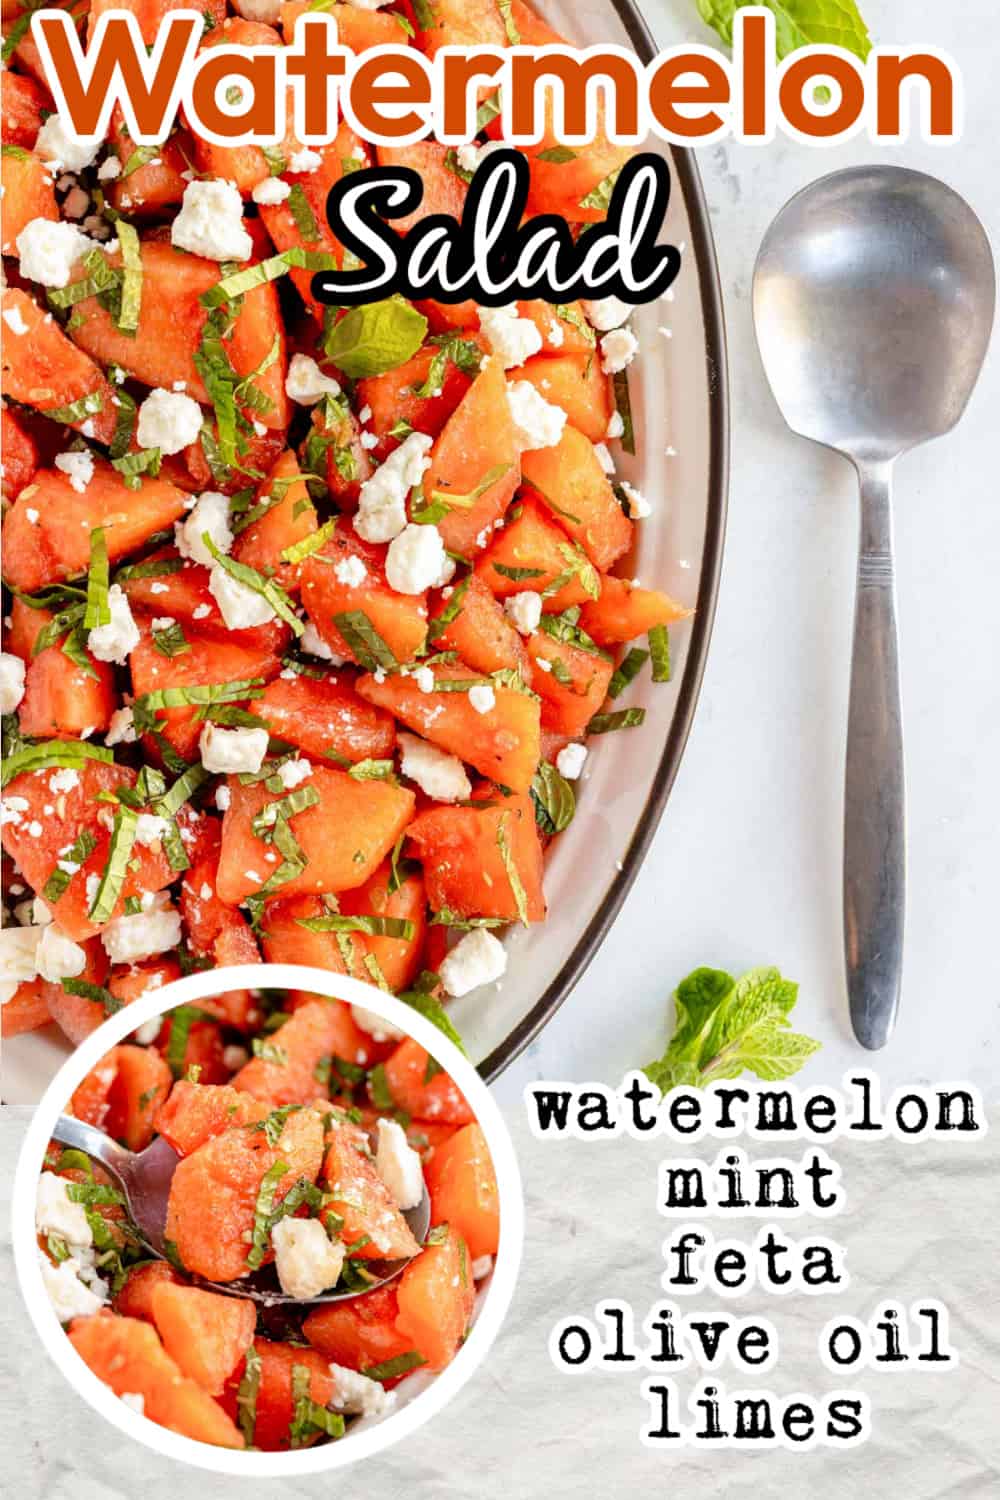 watermelon salad on an oval plate with recipe name overlaid in text.